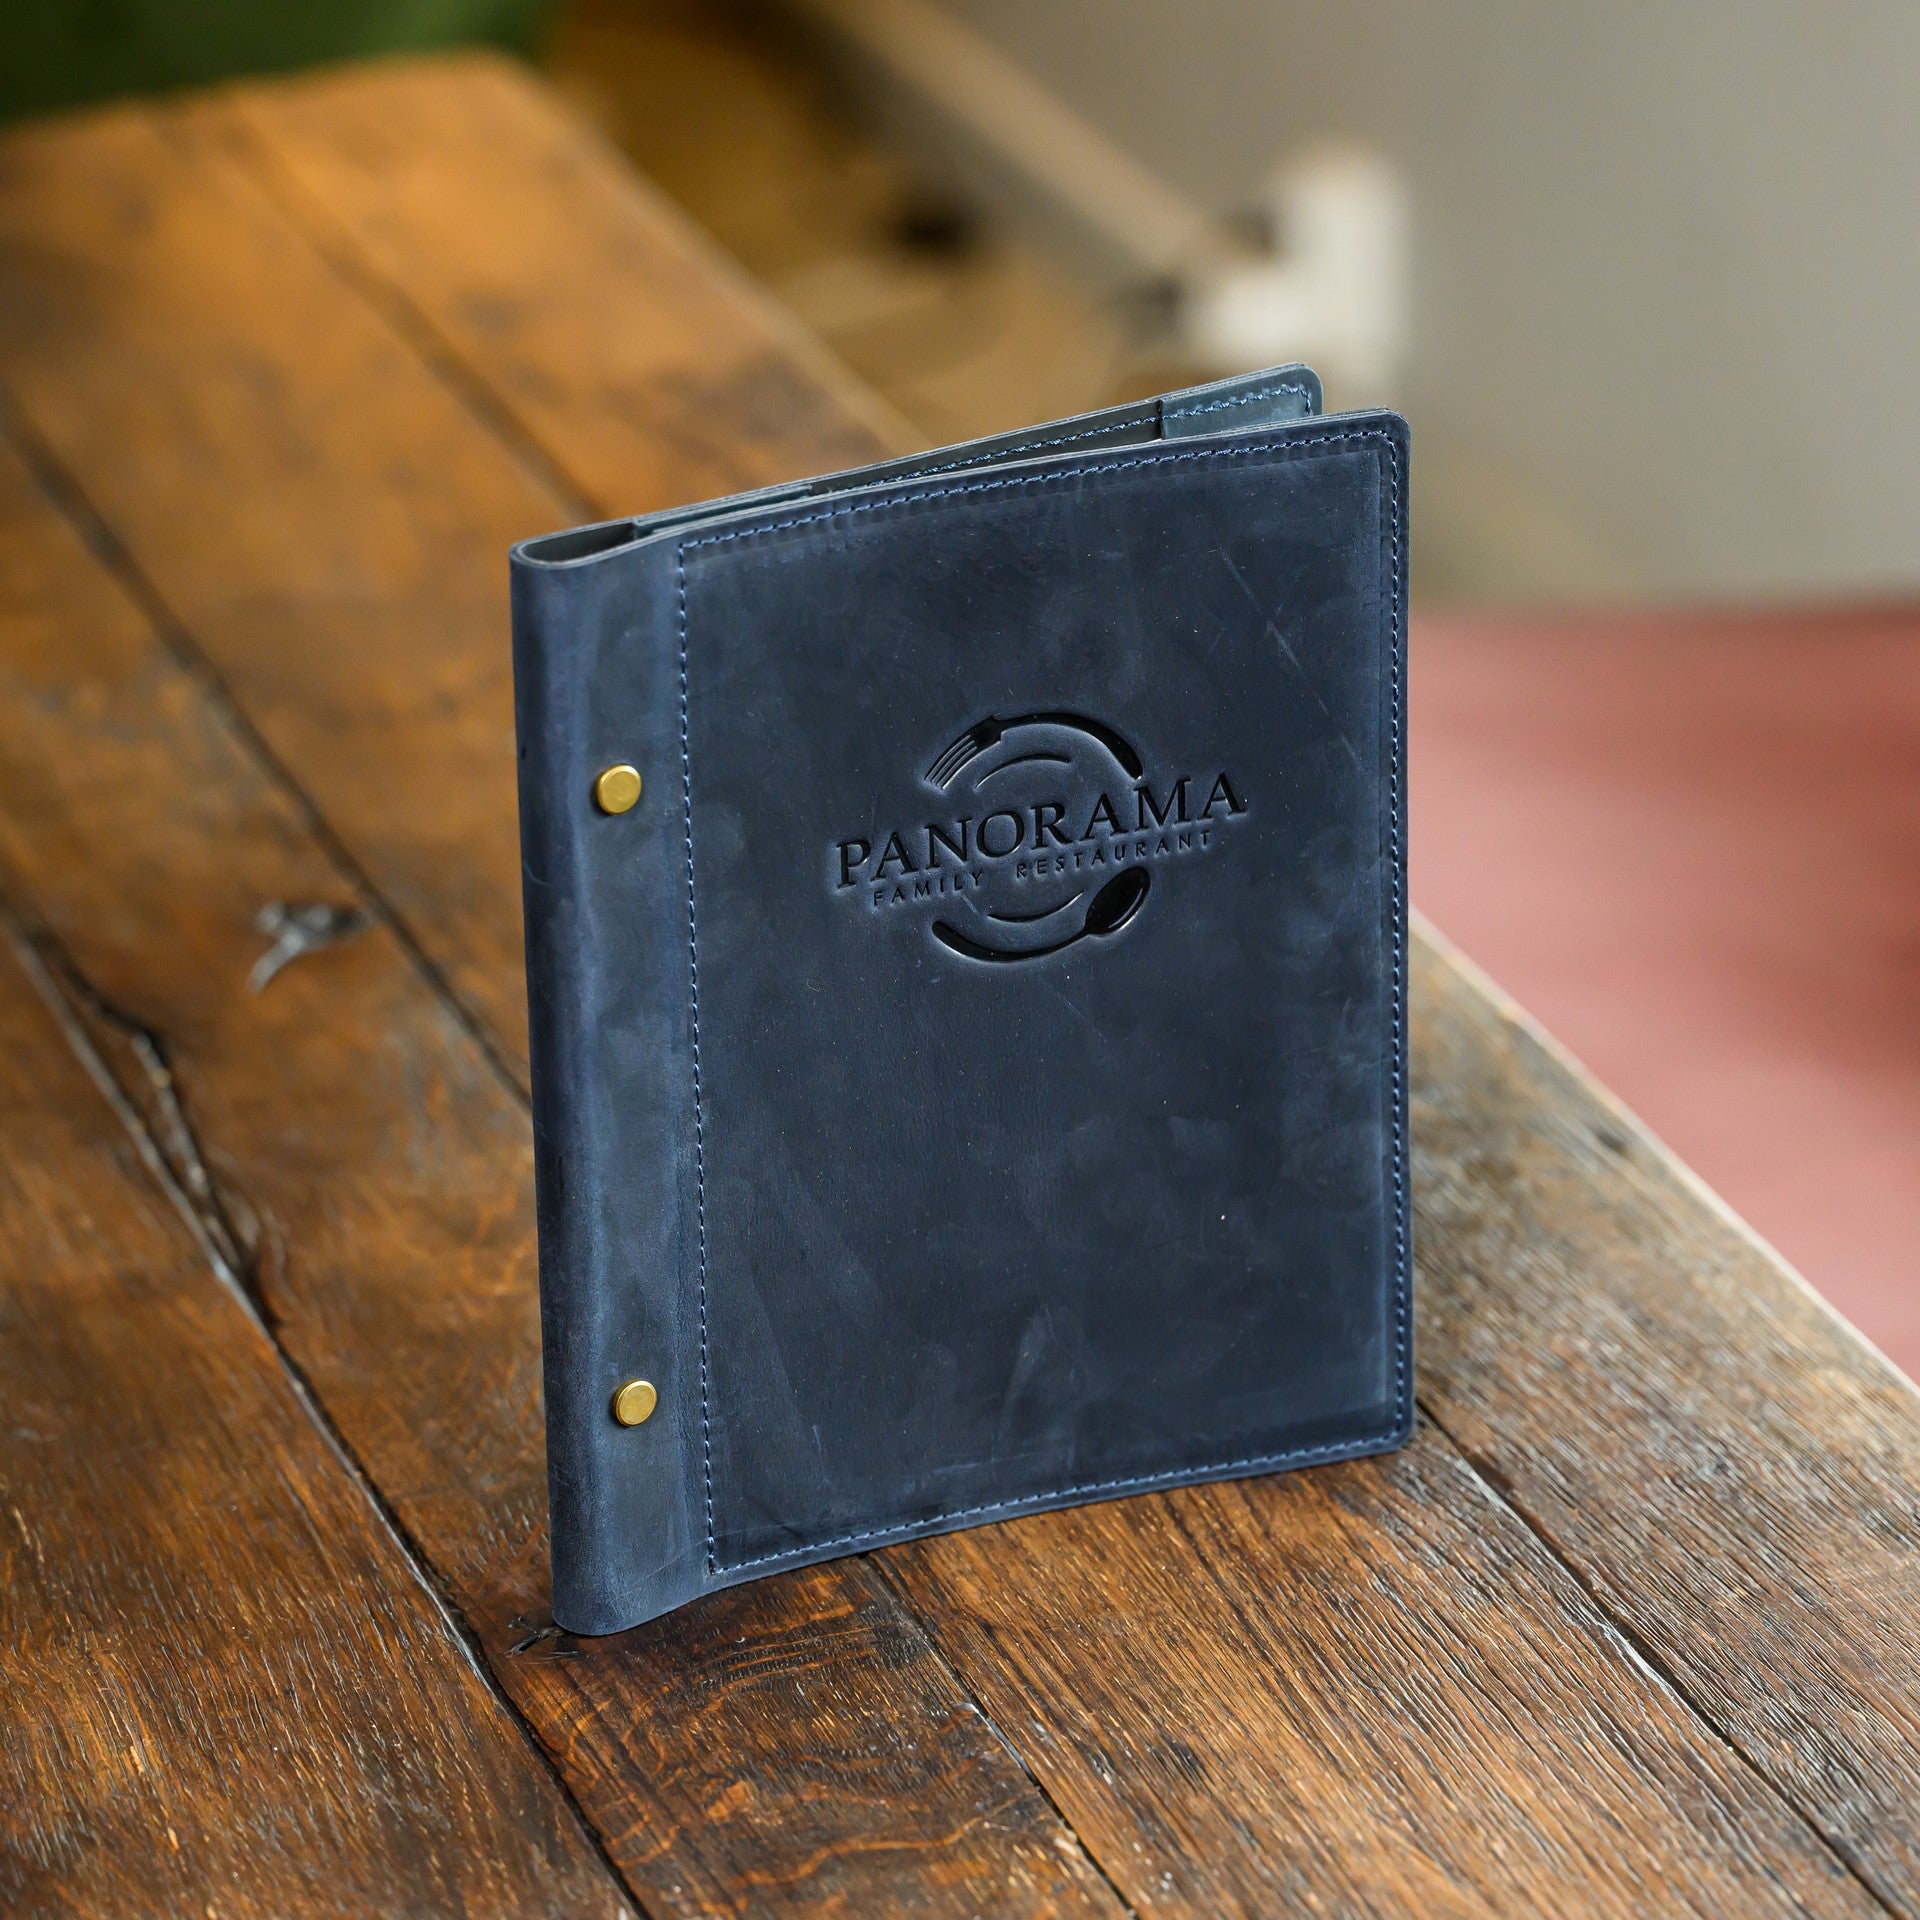 Our cocktail menu cover with logo embossing offers a sophisticated and personalized way to showcase your drinks.